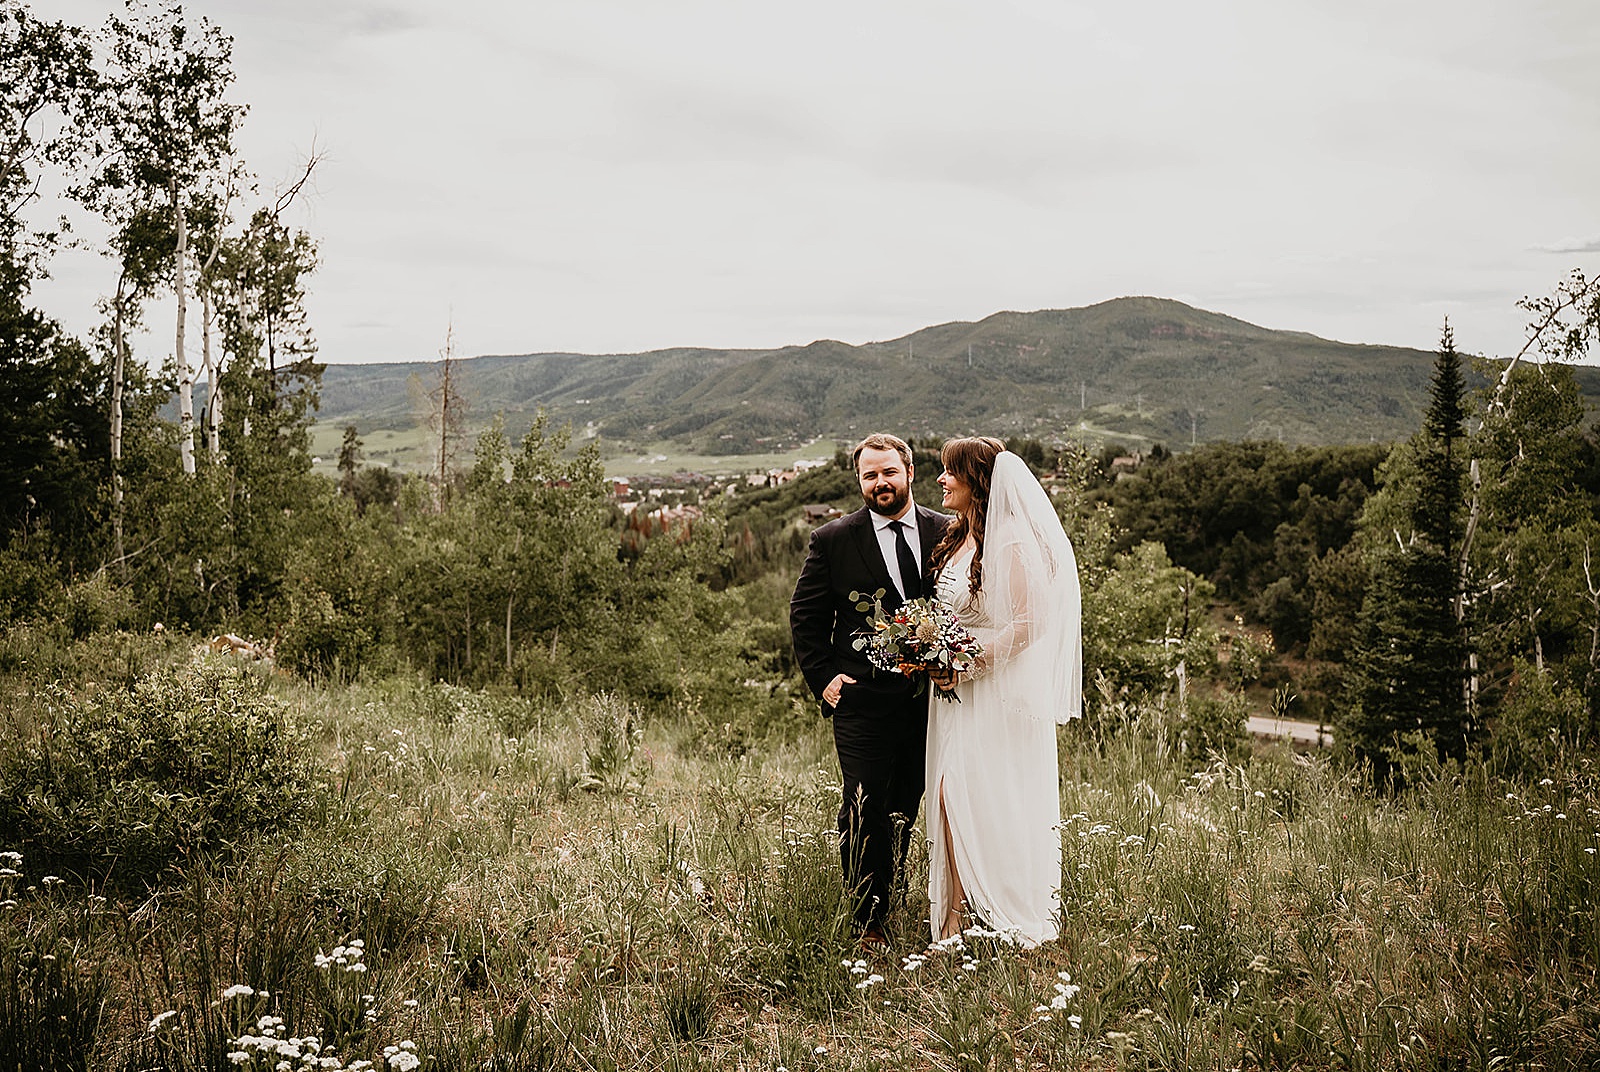 Rustic Colorado Elopement Bride and Groom Portraits by Krystal Capone Photography